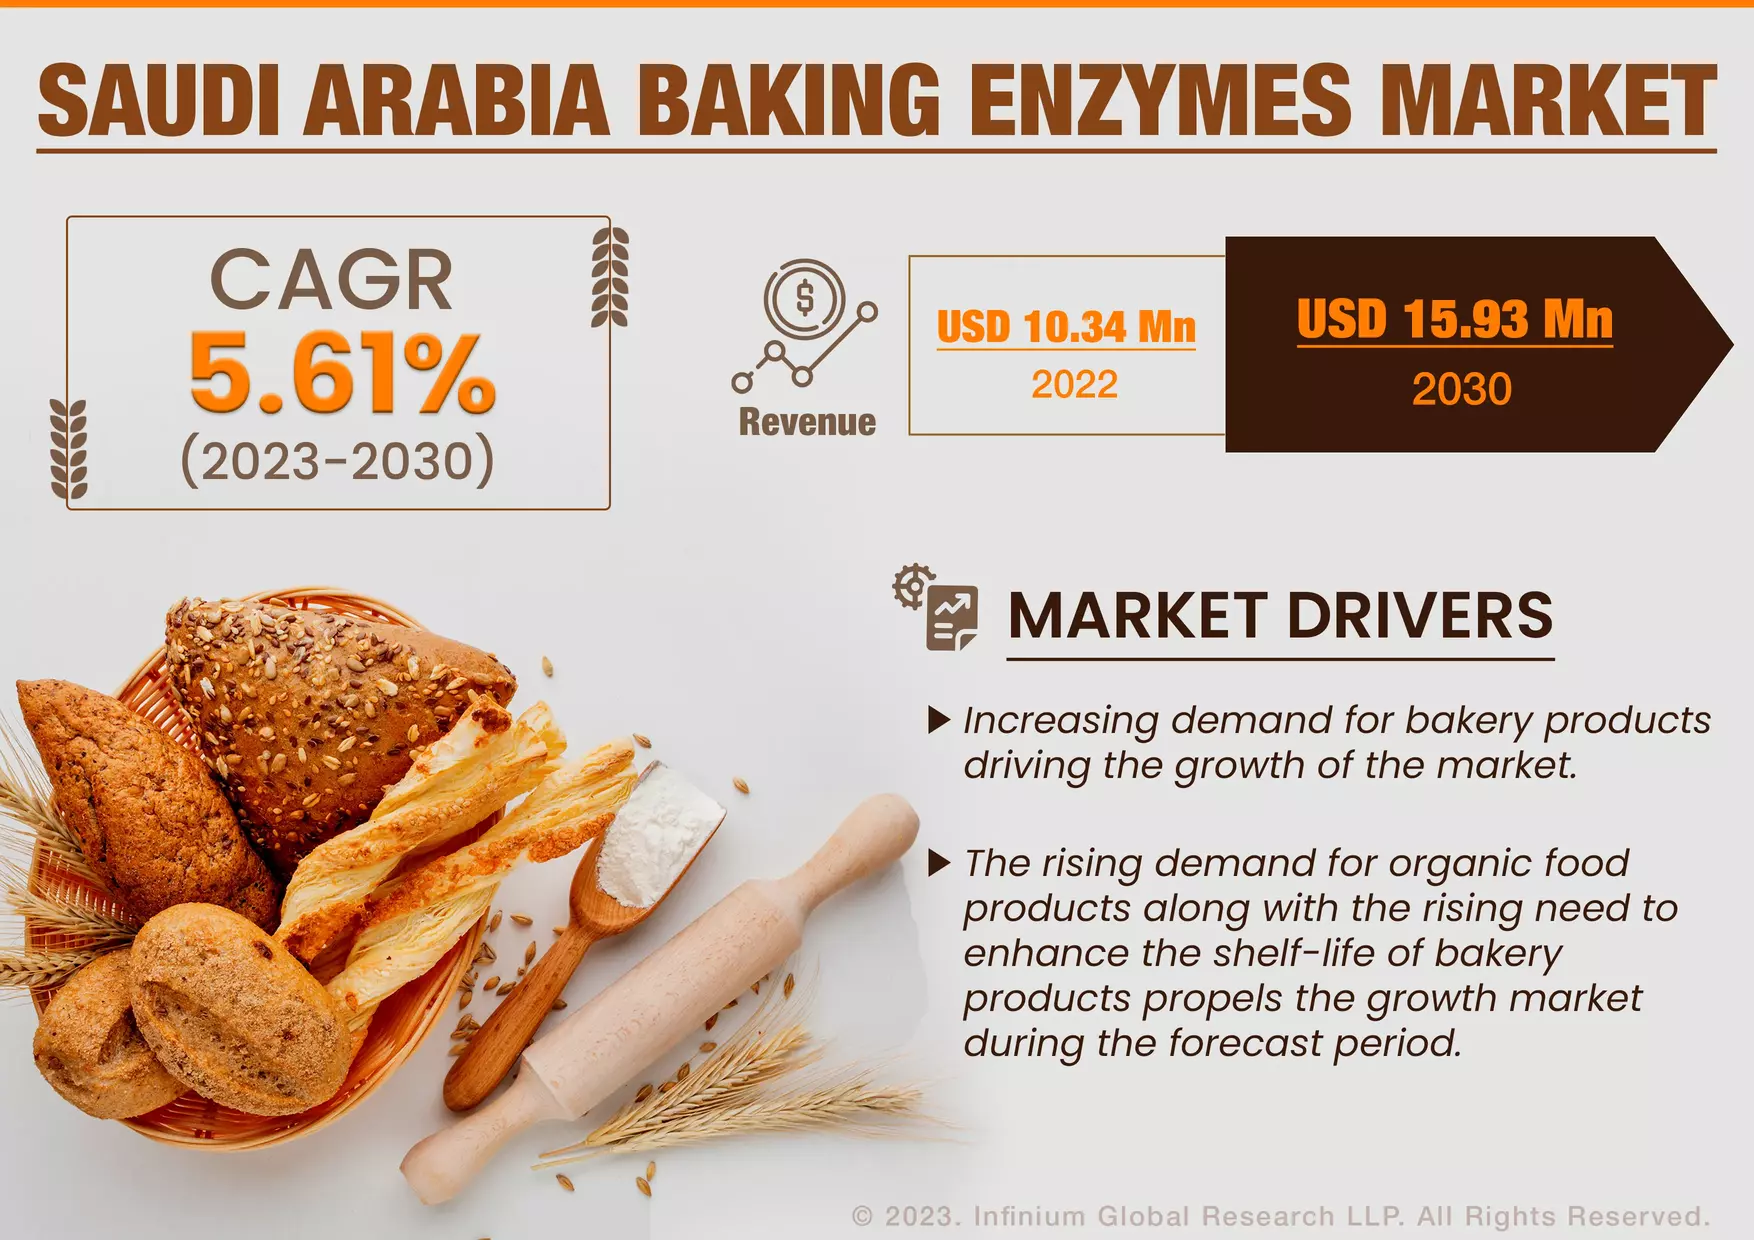 Saudi Arabia Baking Enzymes Market Was Valued at USD 10.34 Million in 2022 and is Expected to Reach USD 15.93 Million by 2030 and Grow at a CAGR of 5.61% Over the Forecast Period 2023-2030.